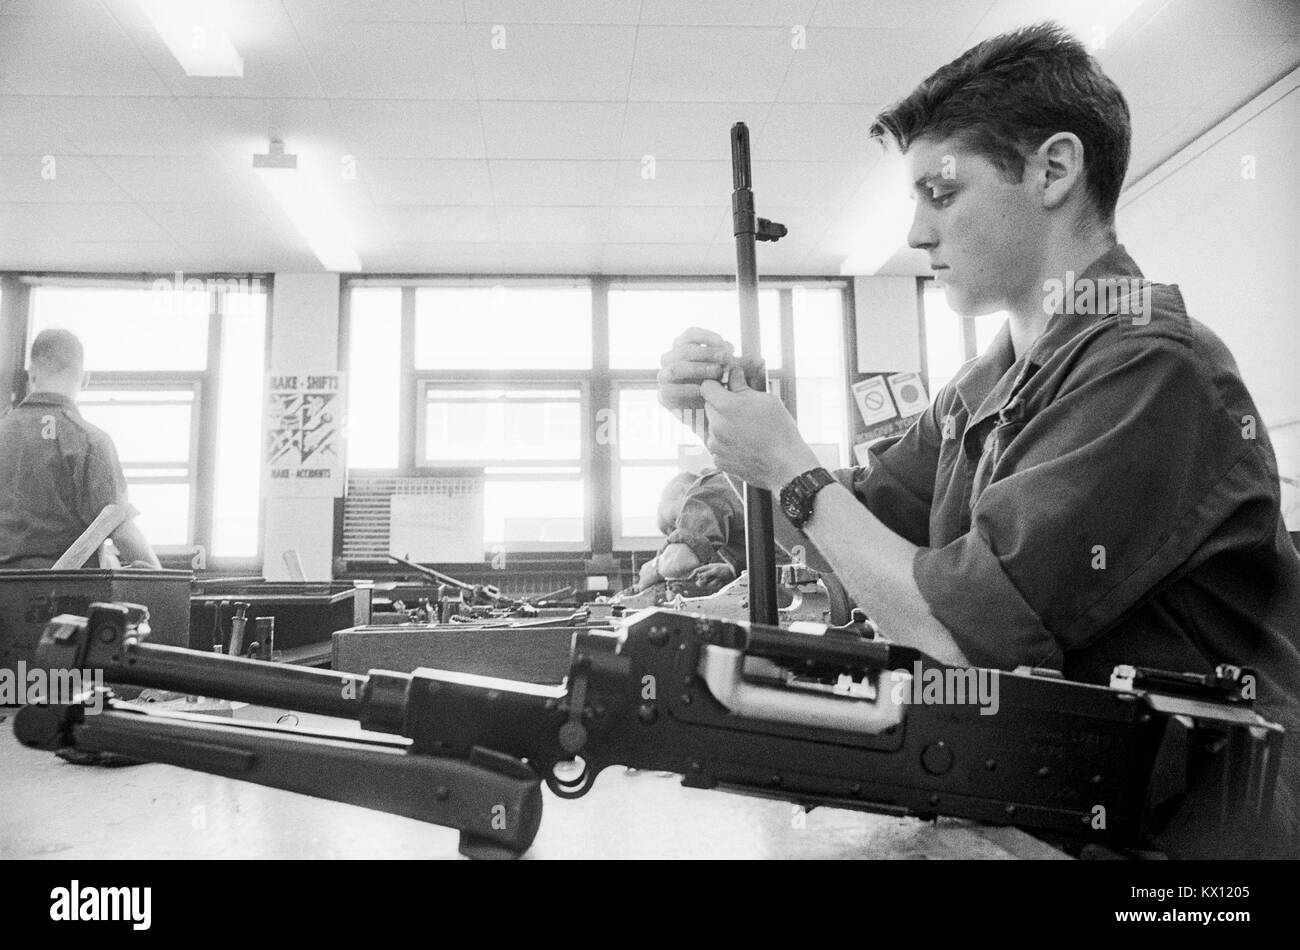 British army squaddies undergoing basic training in a workshop armoury for weapons maintainance training, England, 15th June 1993 Stock Photo